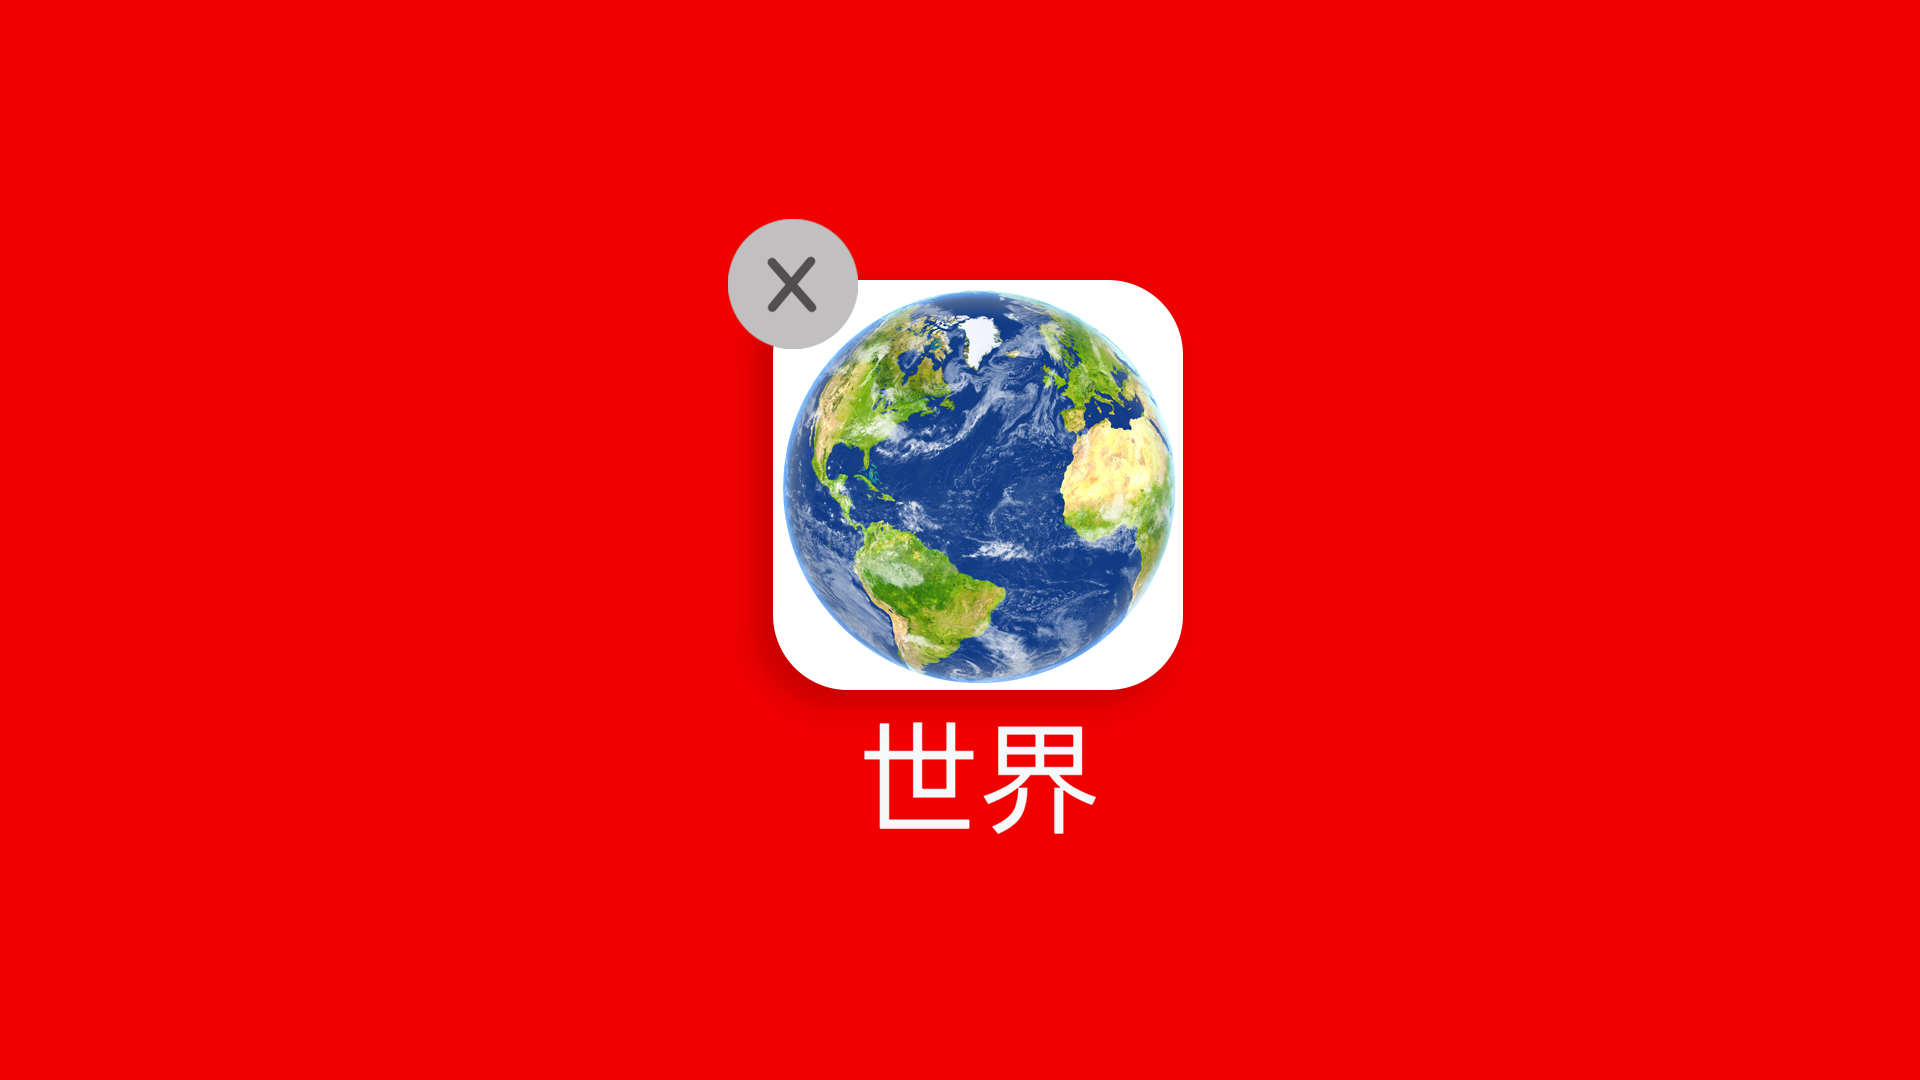 Illustration of the world as an app that has the option to be ex-ed out